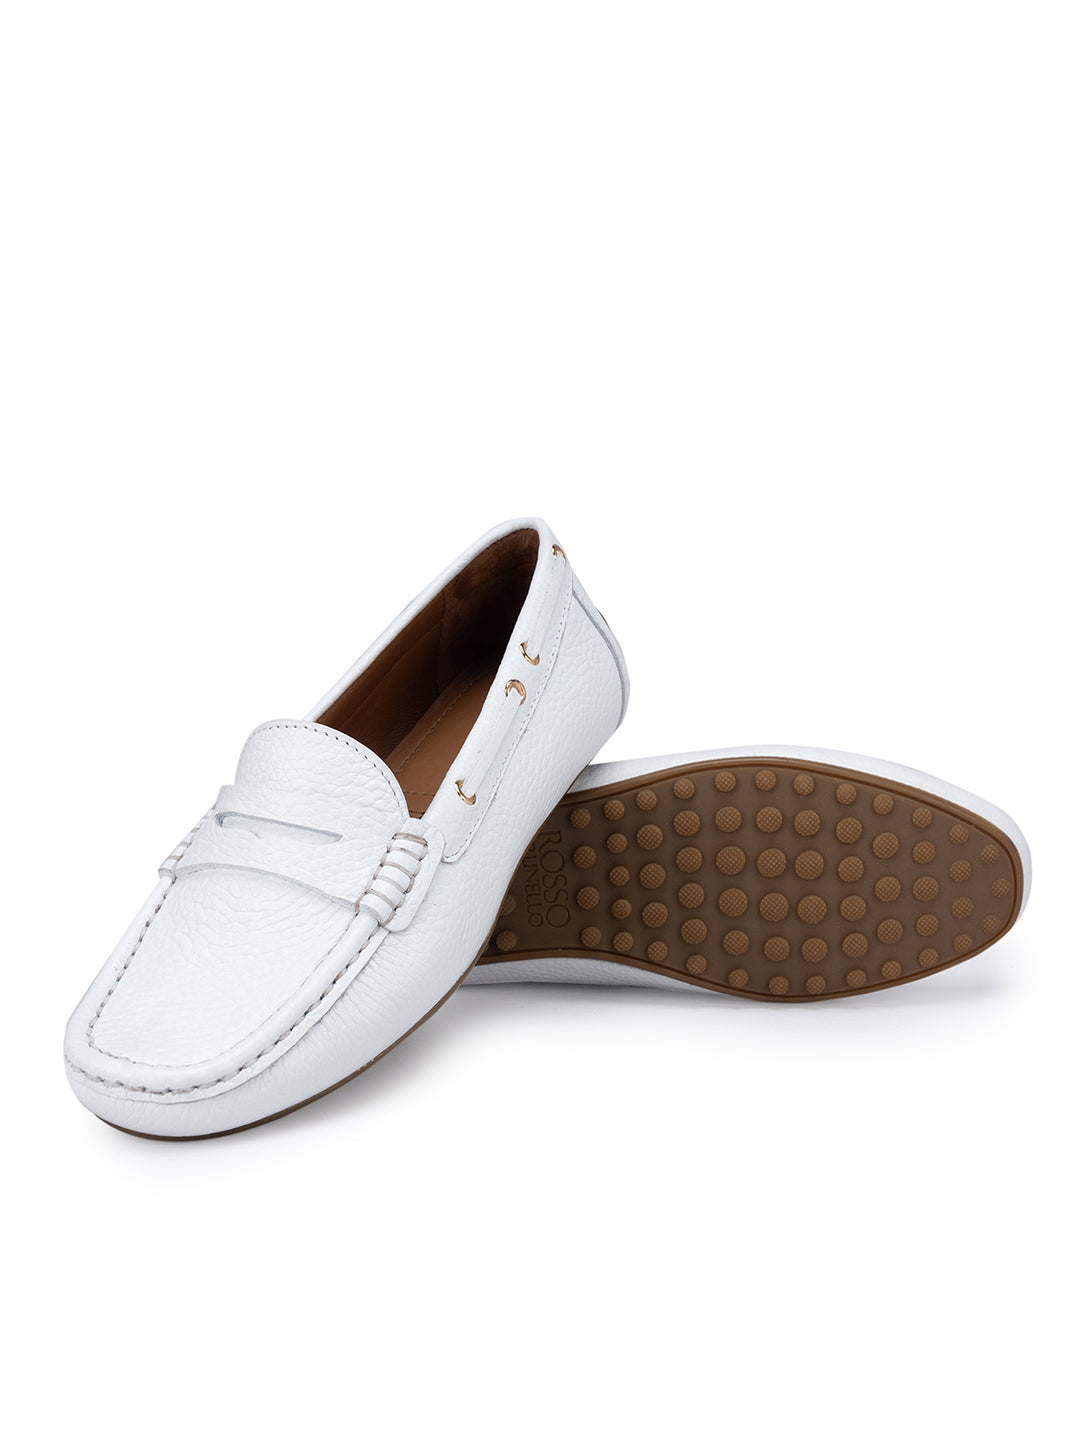 White Moccasins With Leather Panel